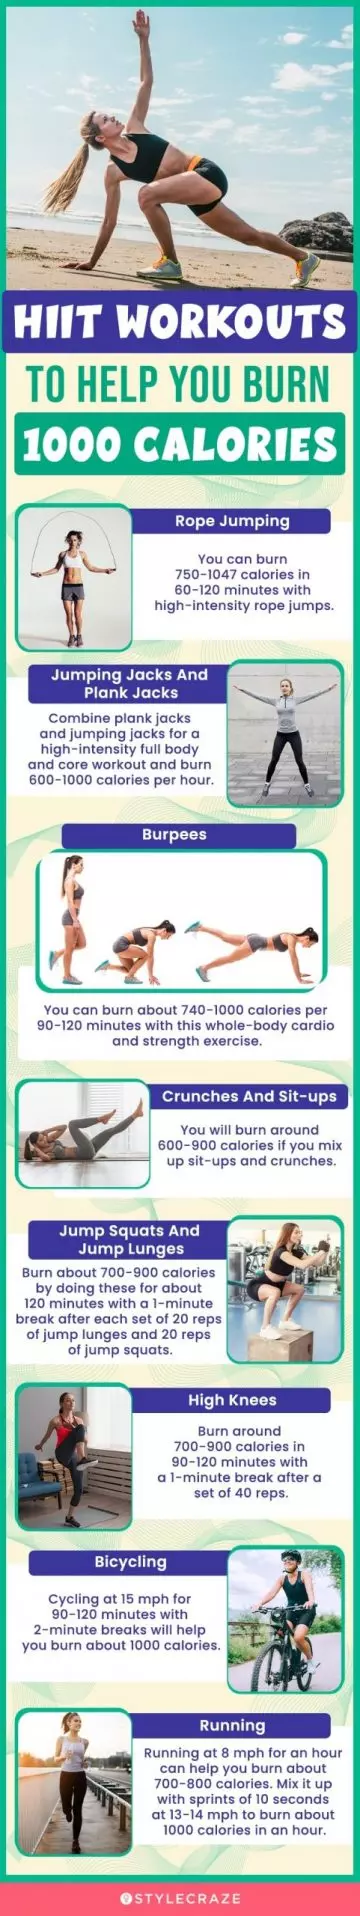 hiit workouts to help you burn 1000 calories (infographic)